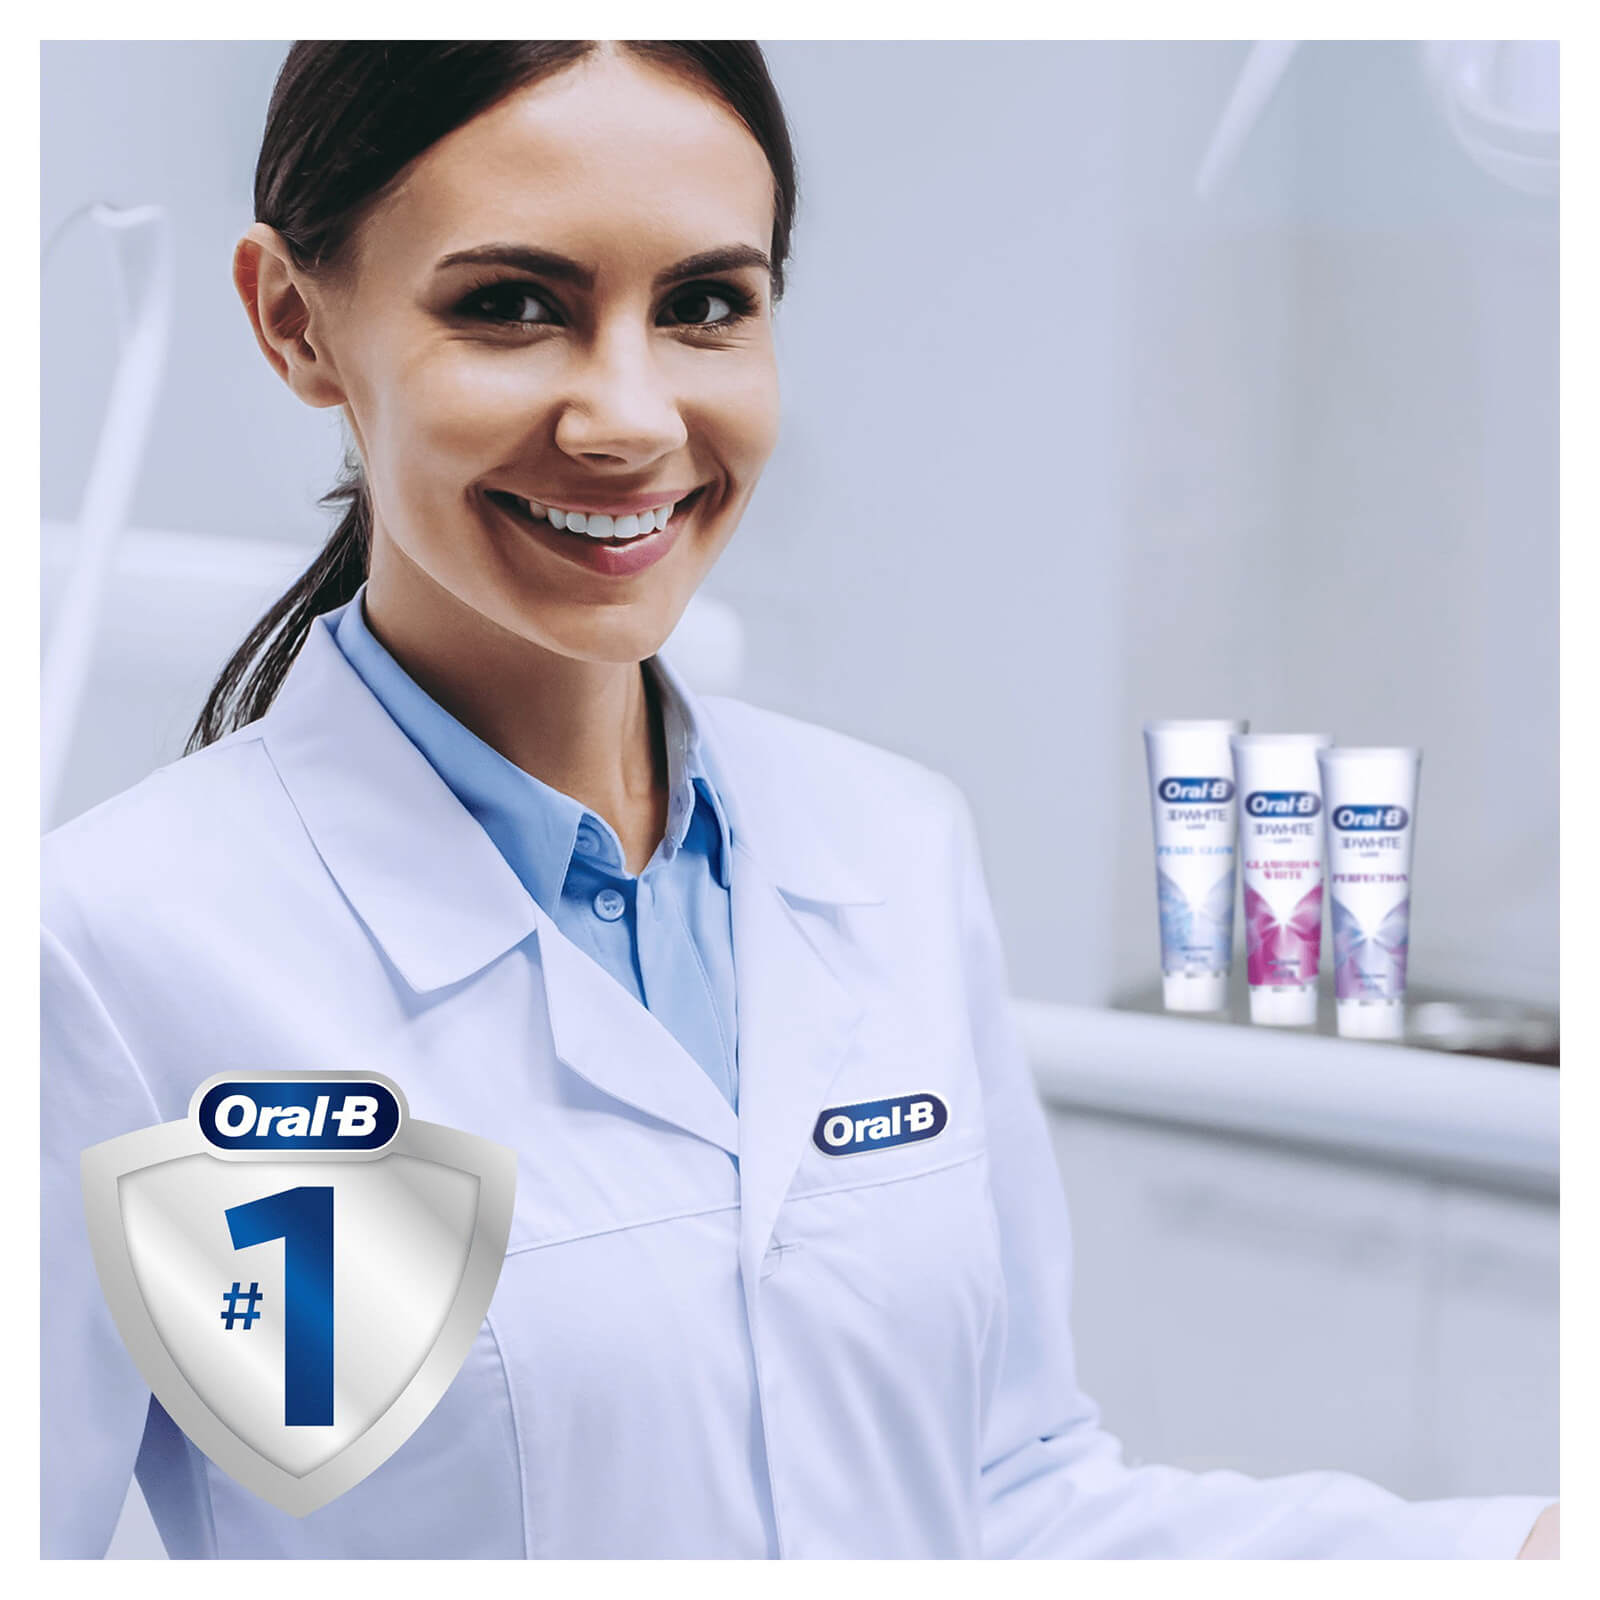 Oral B #1 - image of a dentist smiling with the oral-b toothpaste product